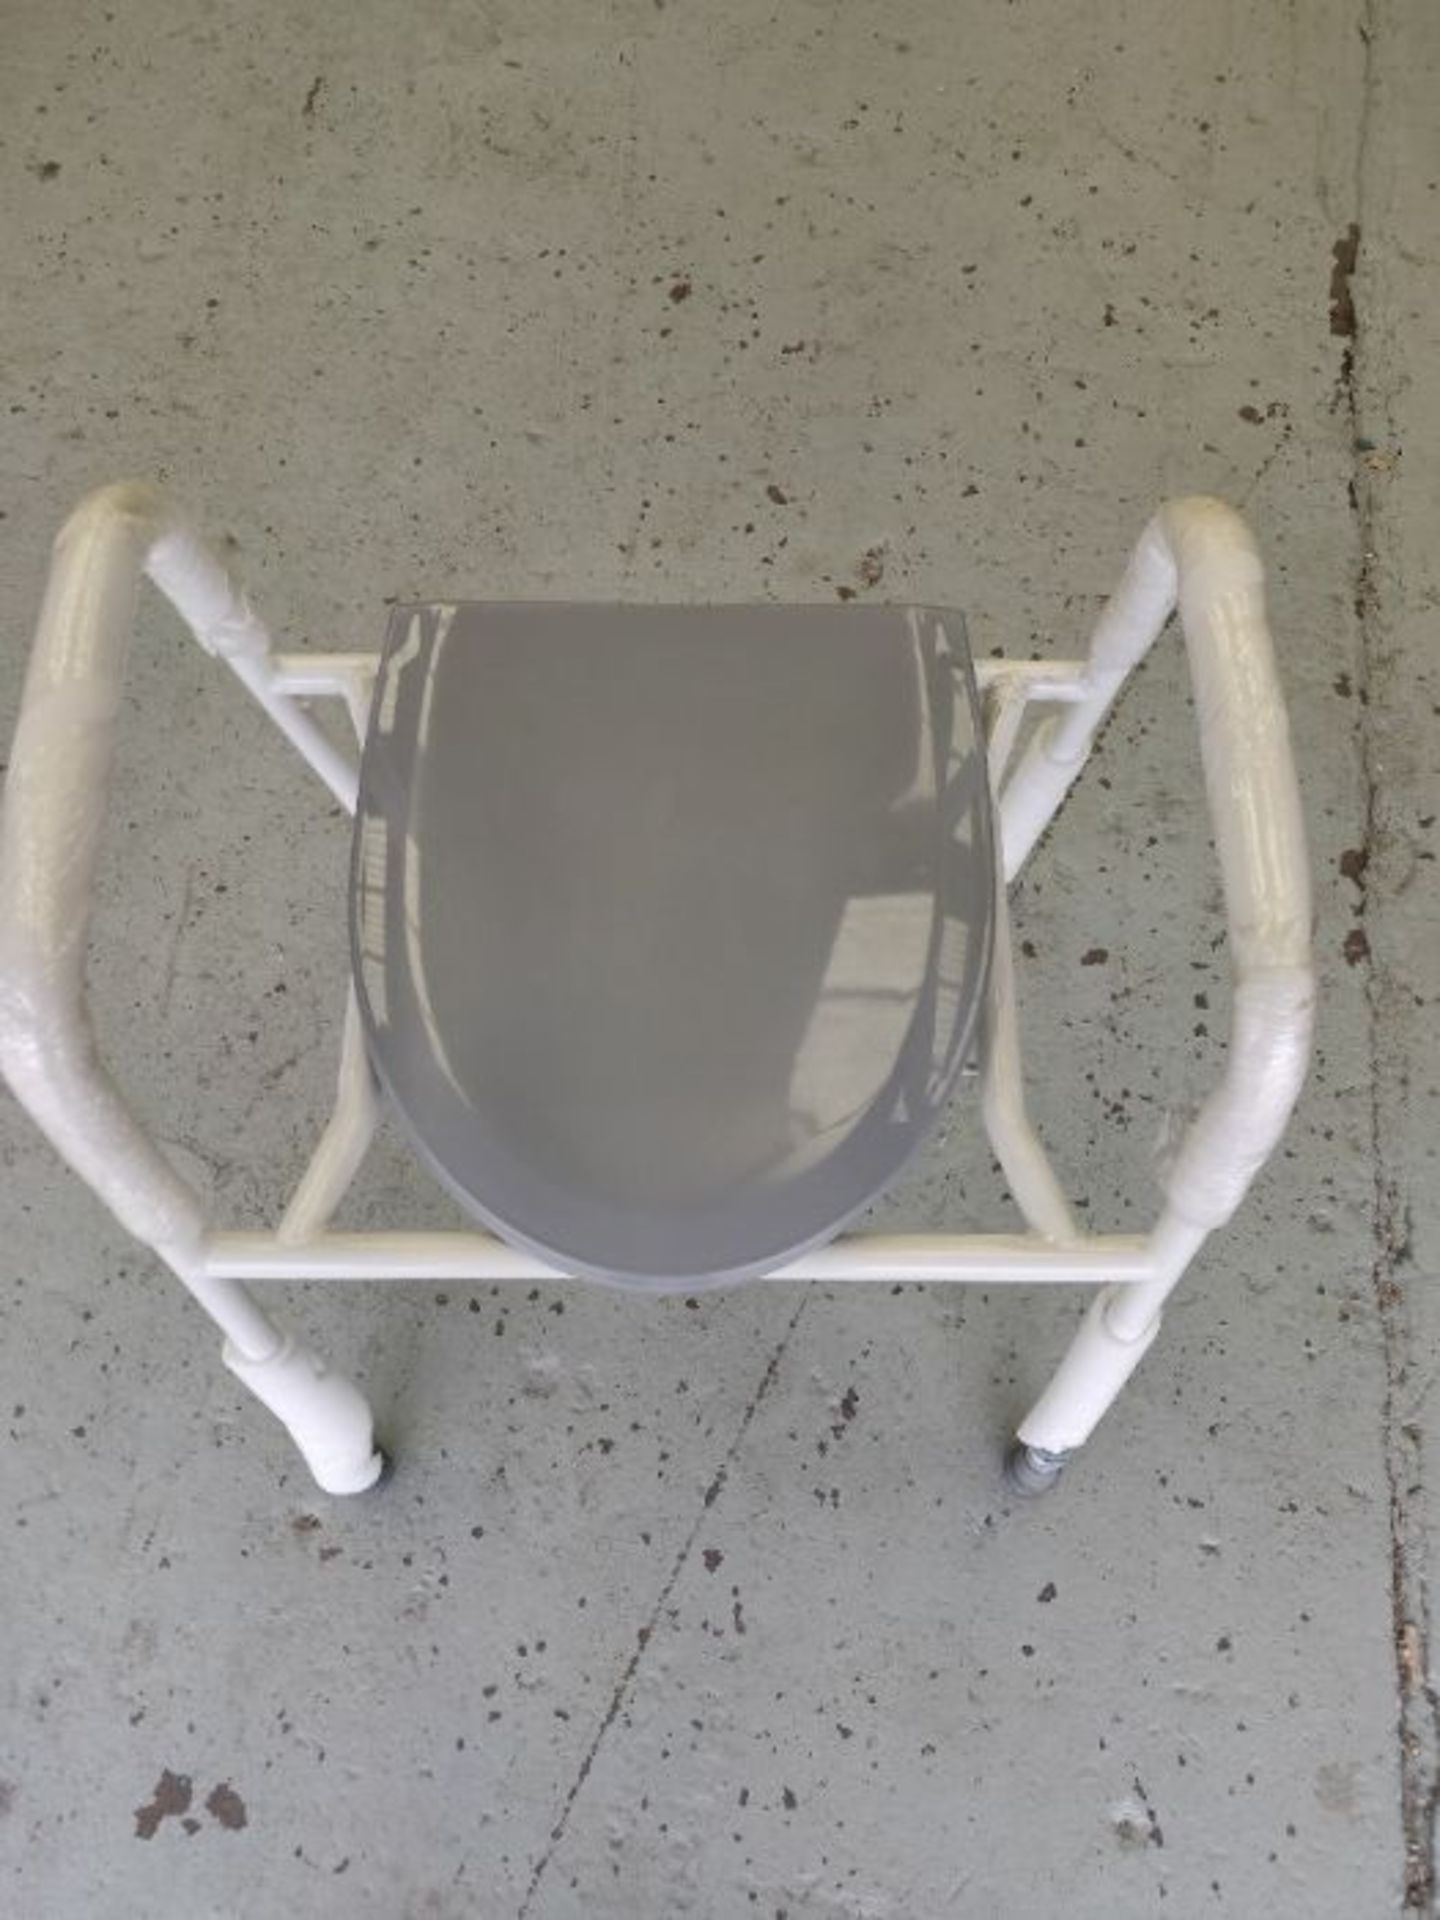 NRS Healthcare Height Adjustable Toilet Frame and Seat - Image 2 of 2